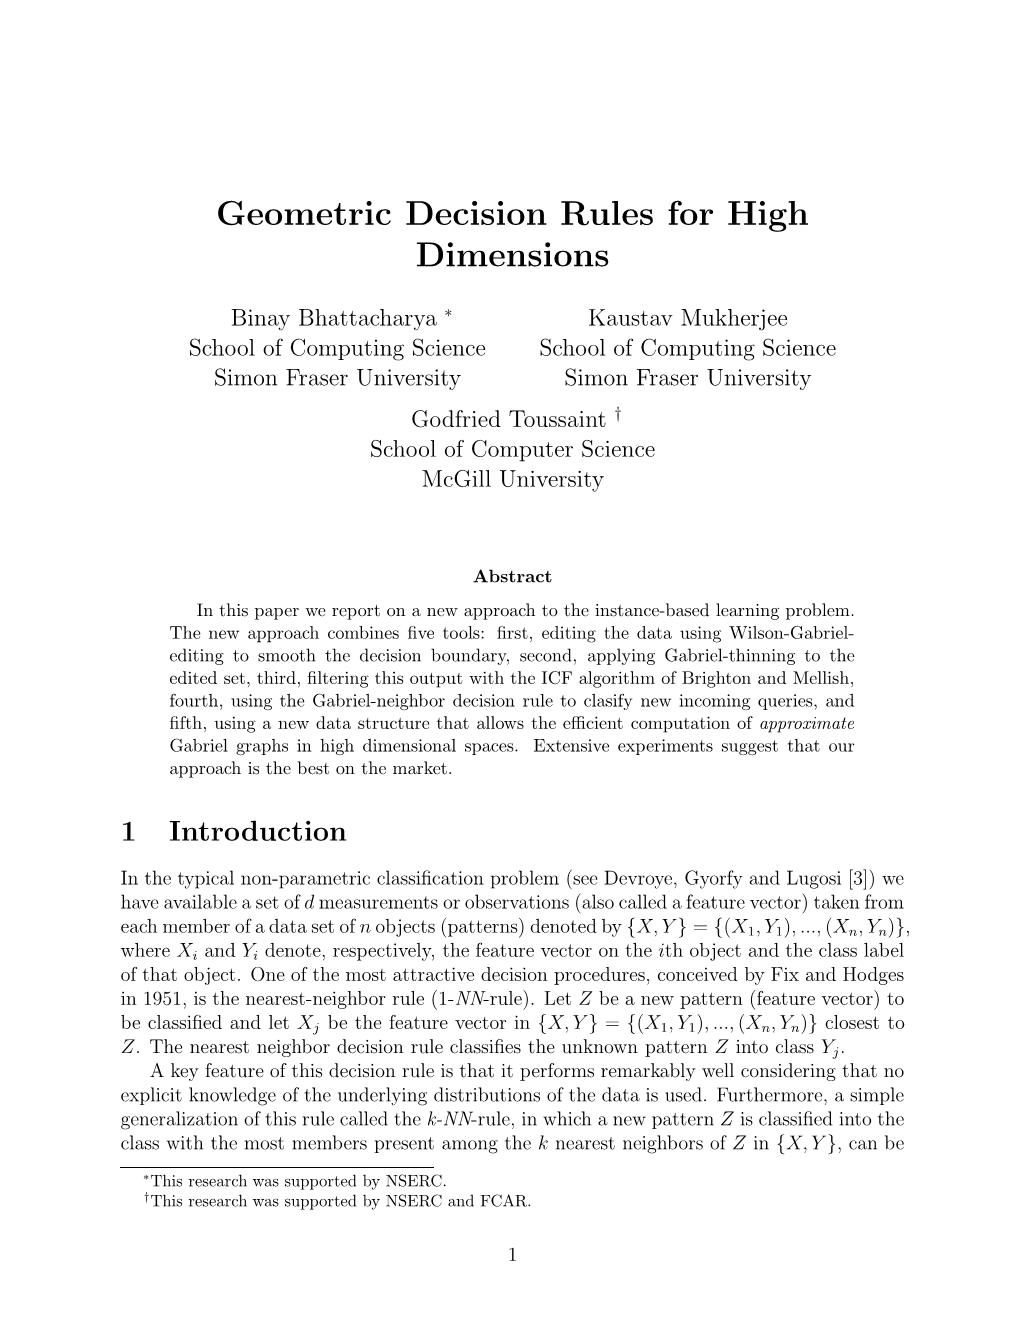 Geometric Decision Rules for High Dimensions